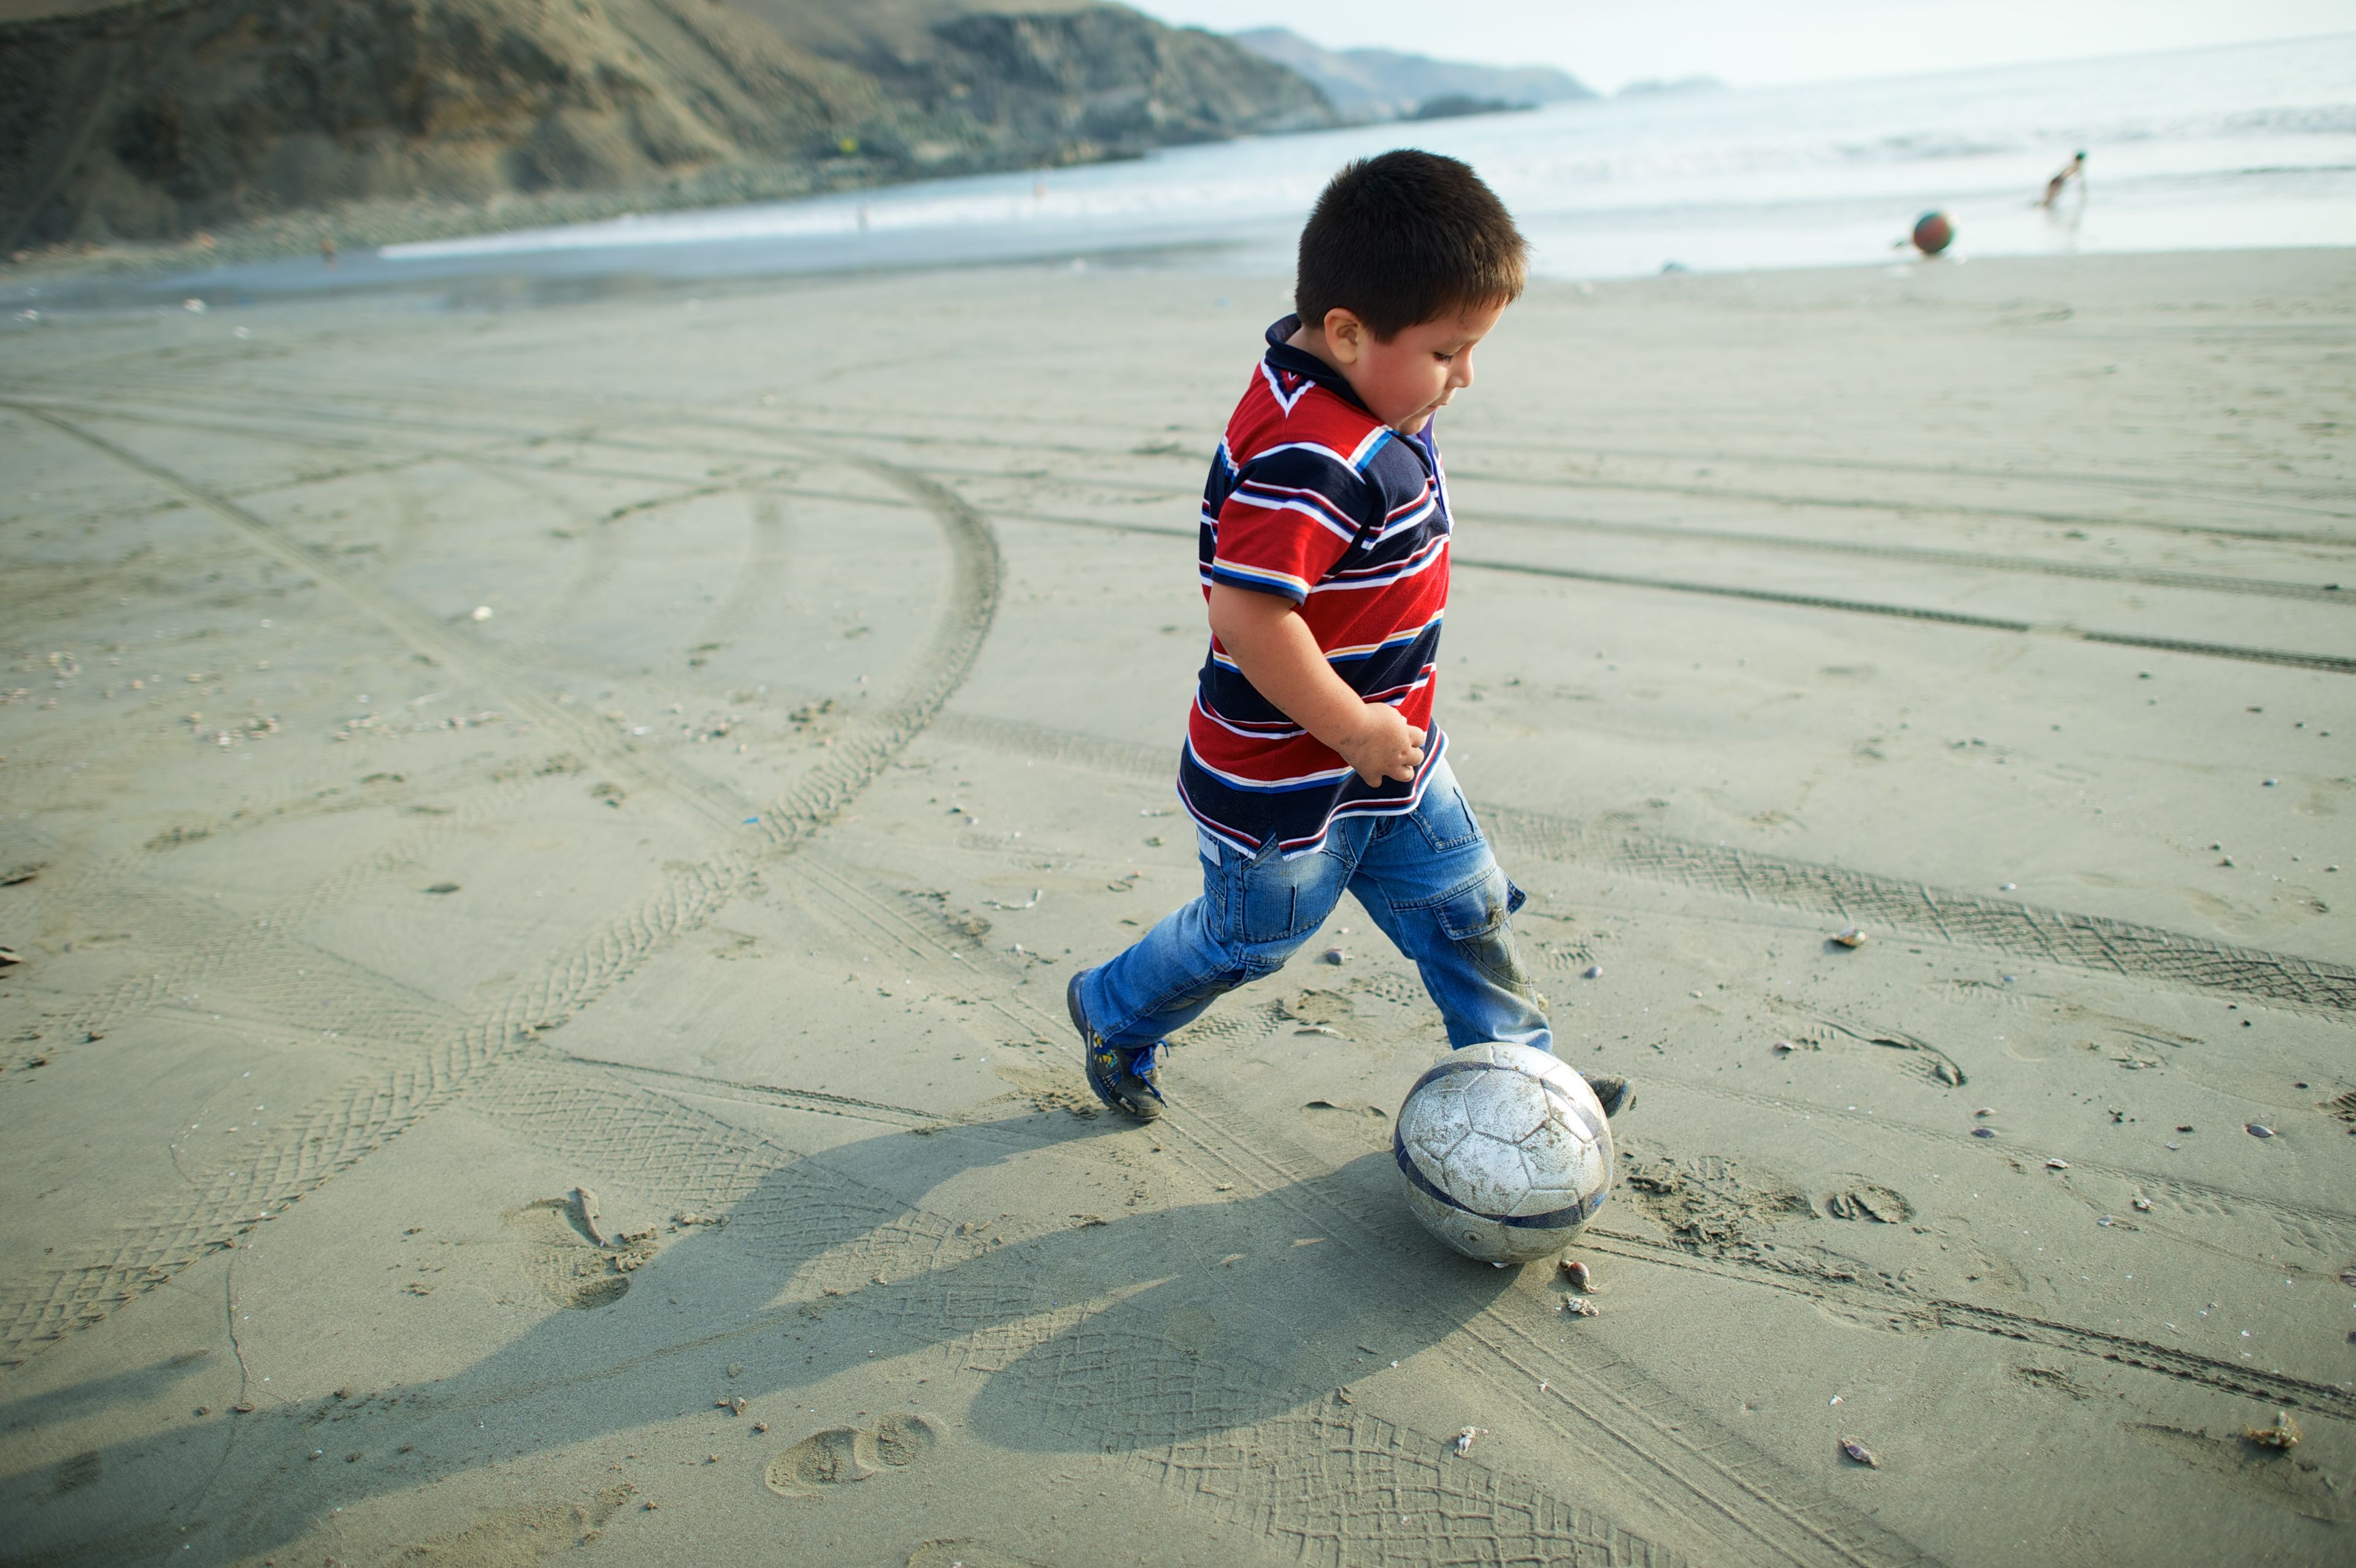 A young Peruvian boy plays soccer on the sand.